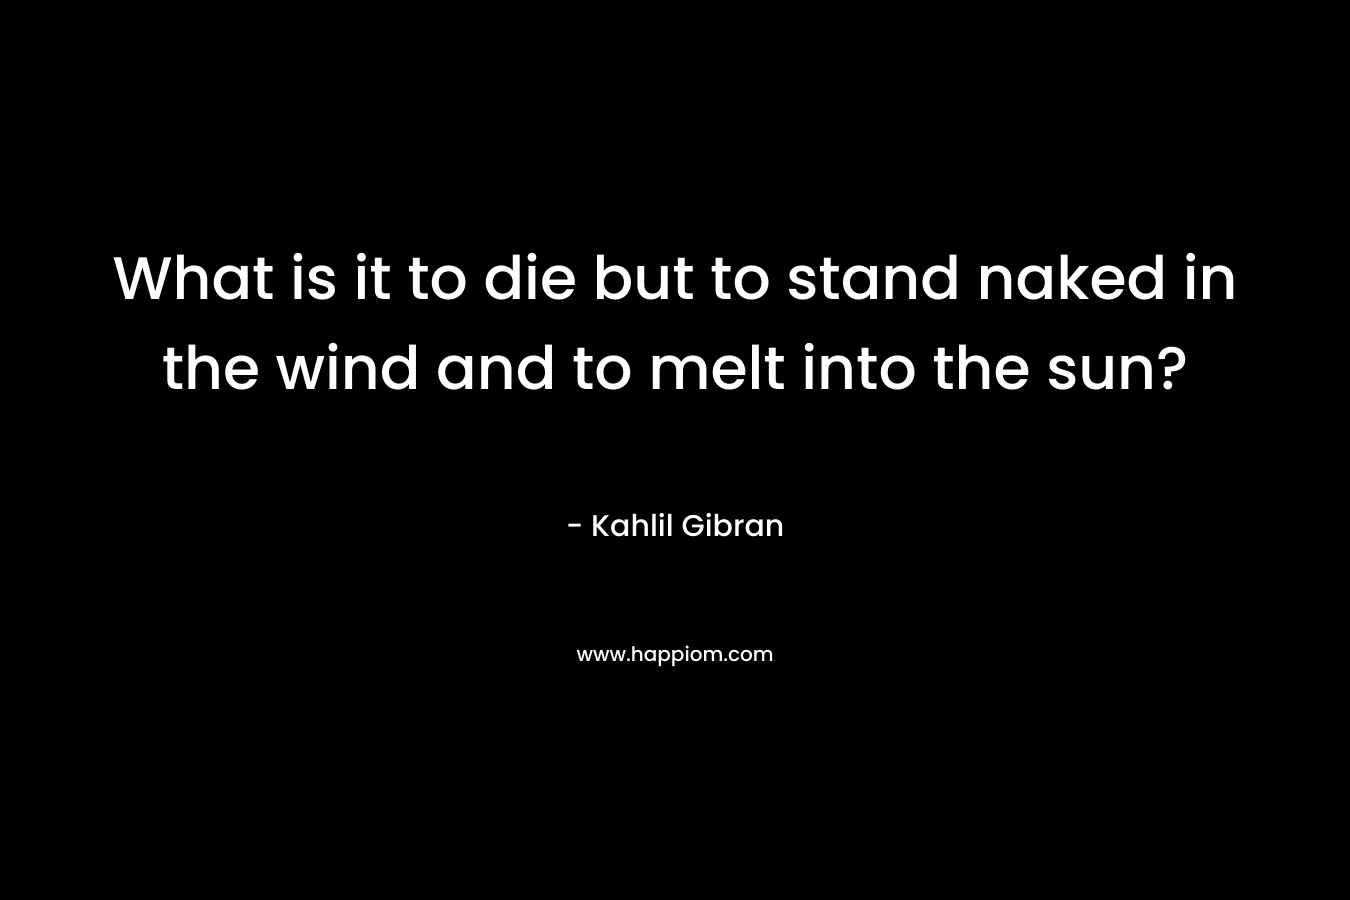 What is it to die but to stand naked in the wind and to melt into the sun? – Kahlil Gibran